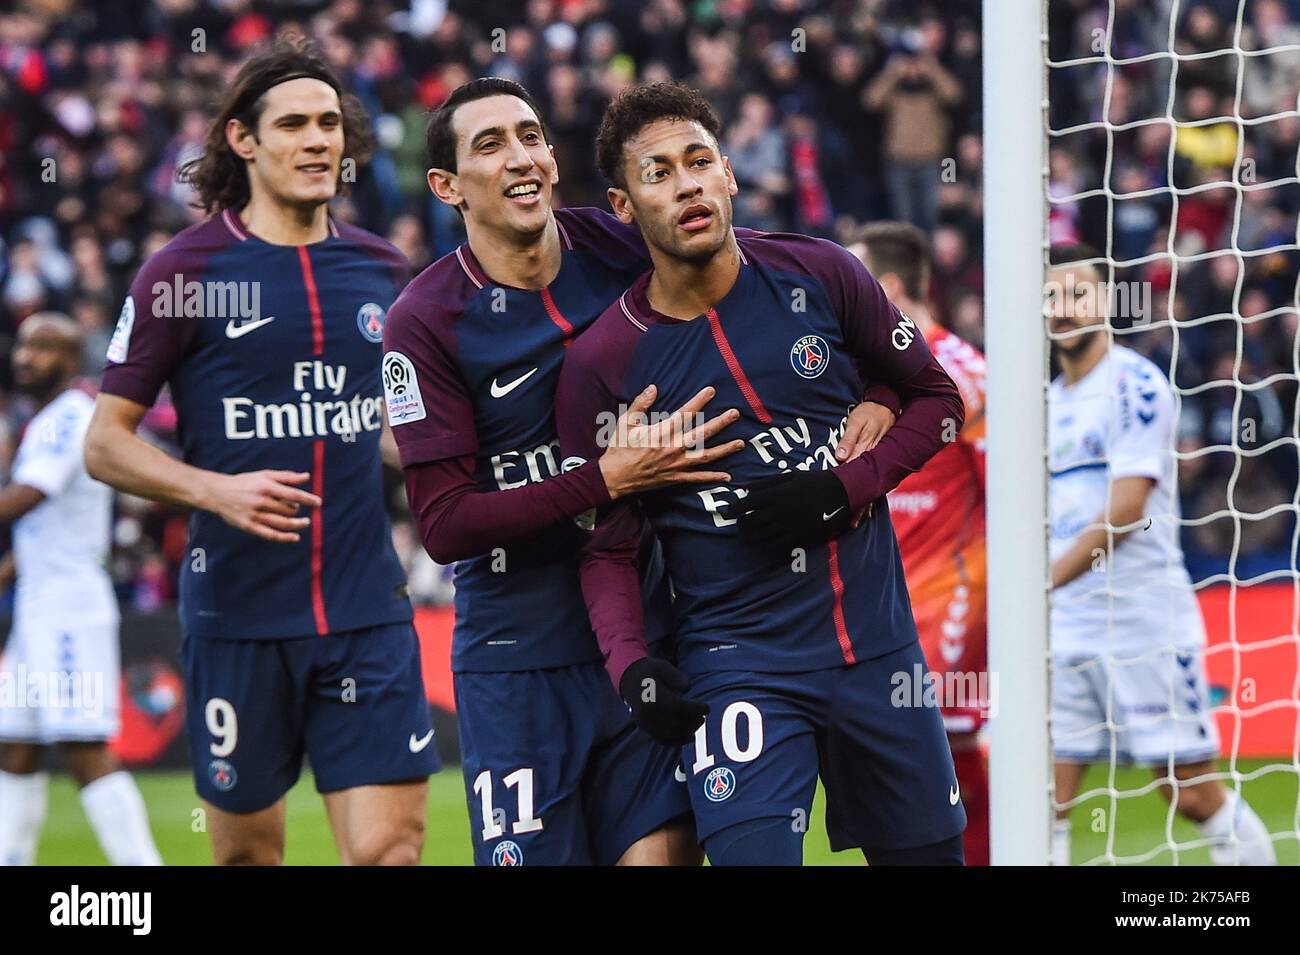 Paris Saint Germain's Neymar Jr (R) celabrates after scoring with teamates  Angel Di Maria (C) and Edinson Cavani (L) during the French Ligue 1 soccer match between Paris Saint Germain (PSG) and Racing Club Strasbourg Alsace at the Parc des Princes stadium in Paris, France, 17 February 2018.  Stock Photo